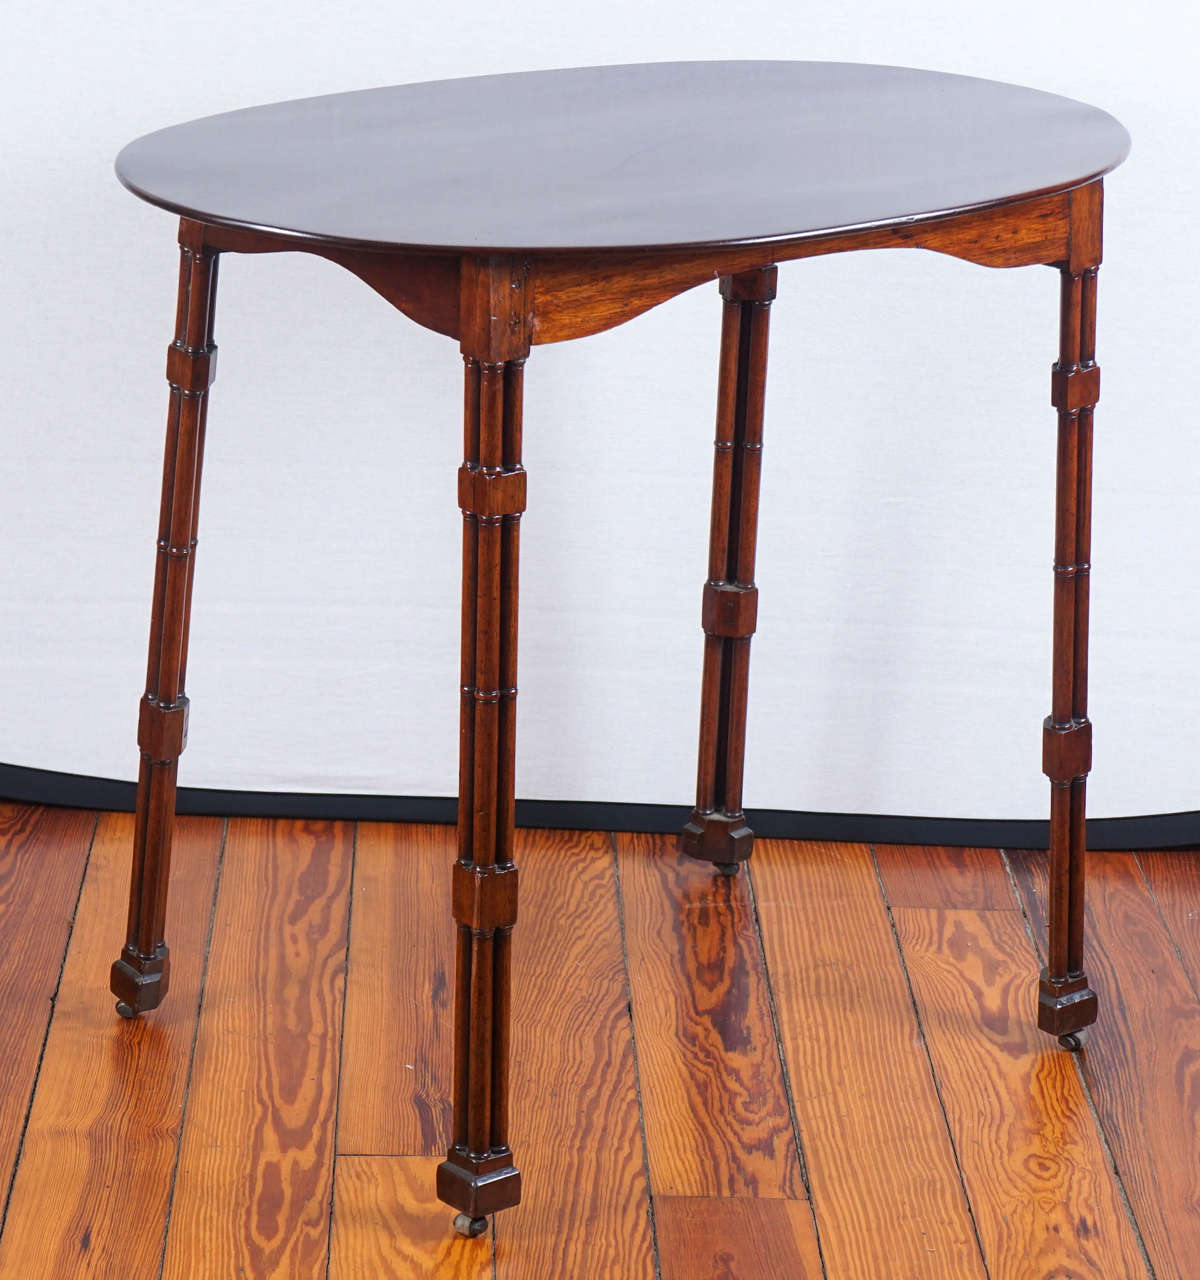 Solid mahogany oval topped Regency table with curved skirt and bamboo carved legs on casters.